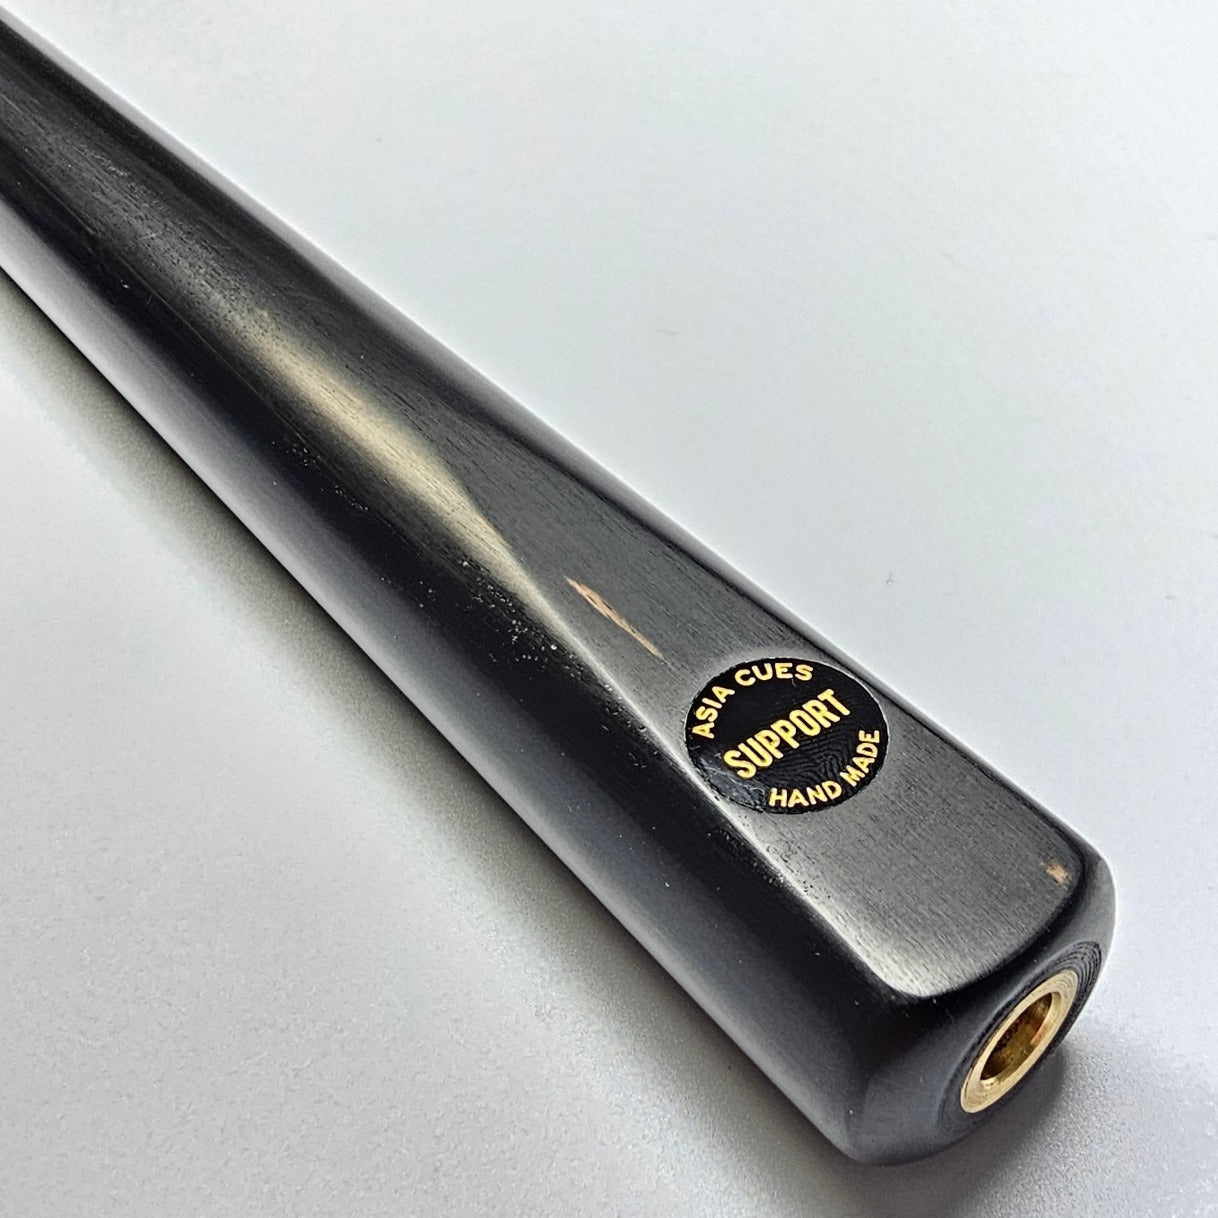 Asia Cues Support - One Piece Snooker Cue  Handmade Ebony Butt. Badge View